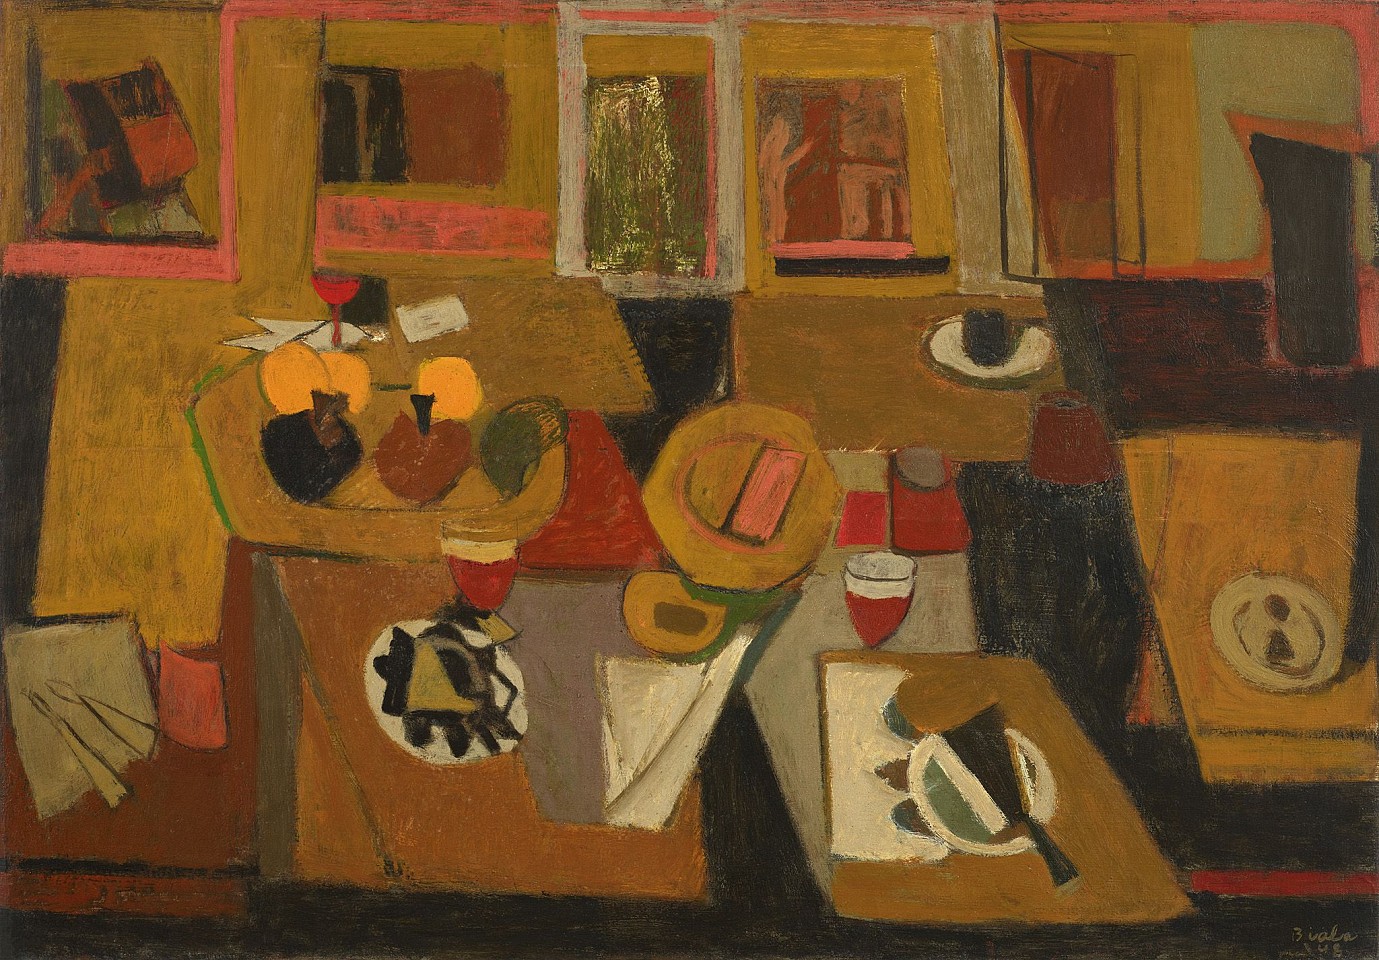 Janice Biala, Nature Morte à la Table, 1948
Oil on canvas, 31 1/4 x 45 in. (79.4 x 114.3 cm)
BIAL-00043